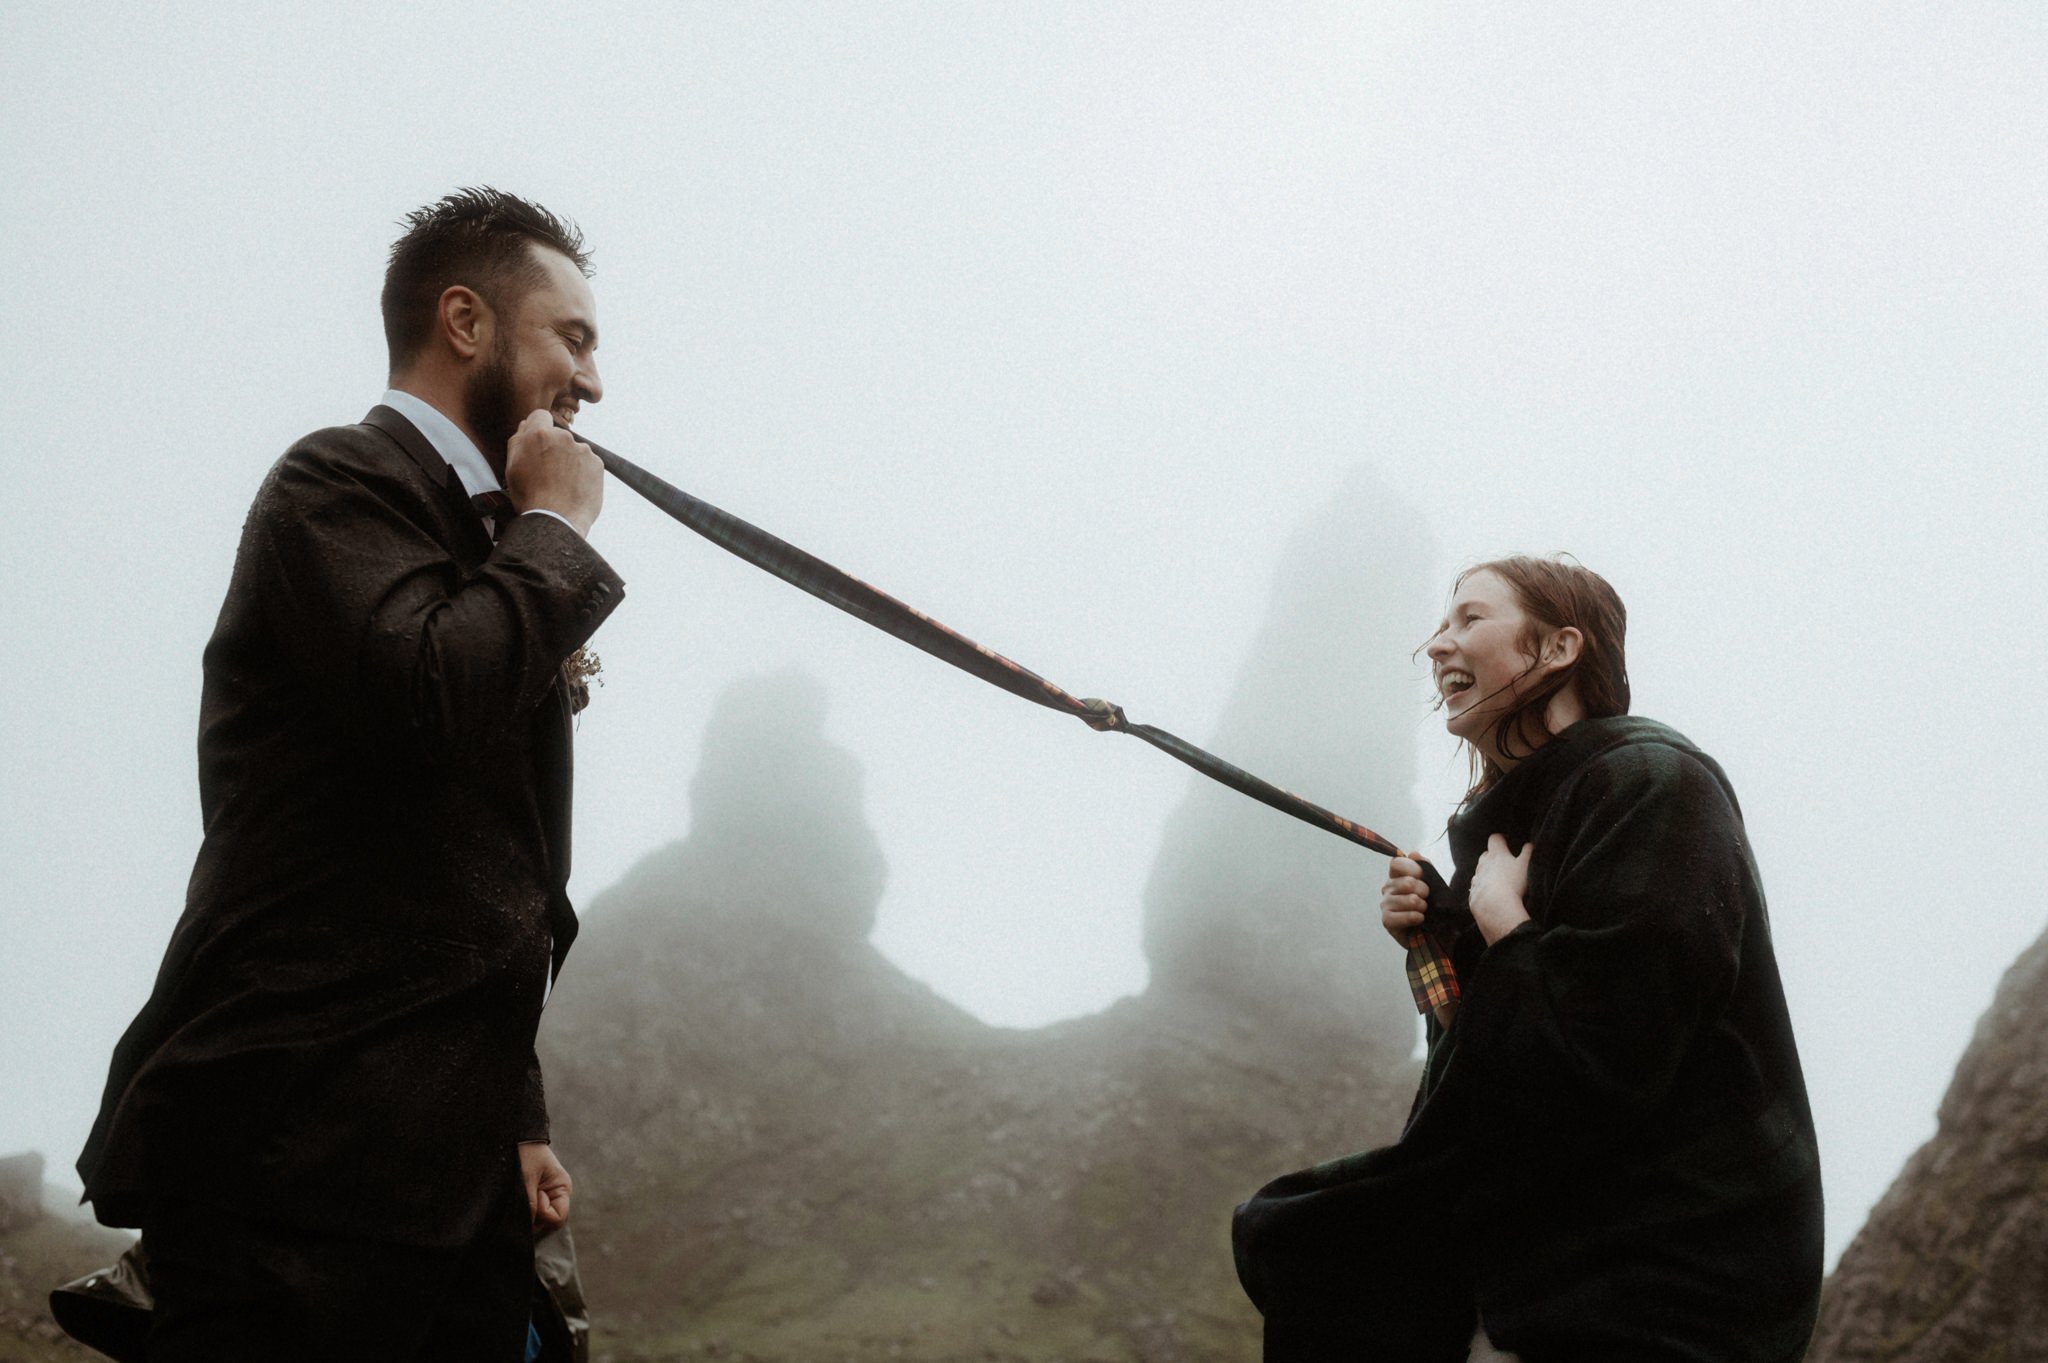 A traditional Scottish hand-fasting taking place during a wedding in Scotland outdoors in the rain with Bride and groom holding tartan ribbon near the Old man of Storr on Skye